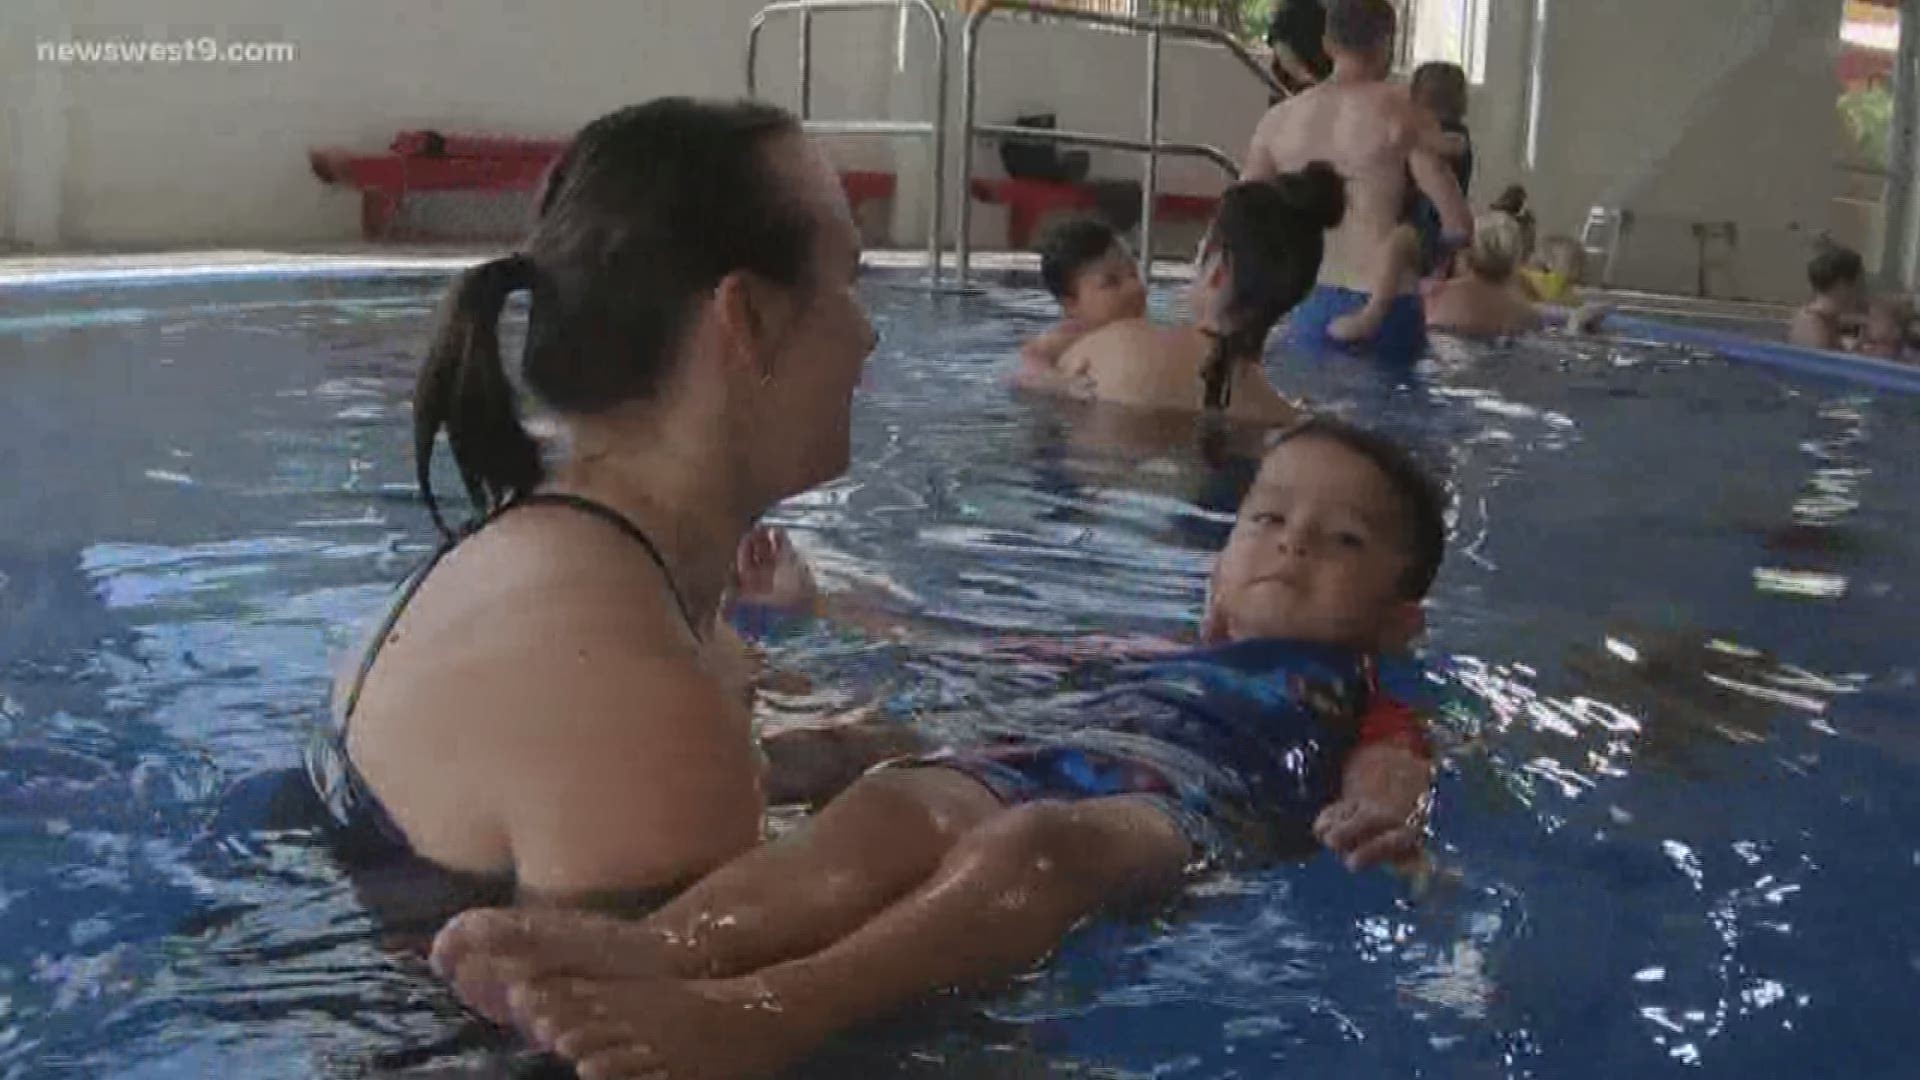 What steps can you take to keep your kids safe at the pool?